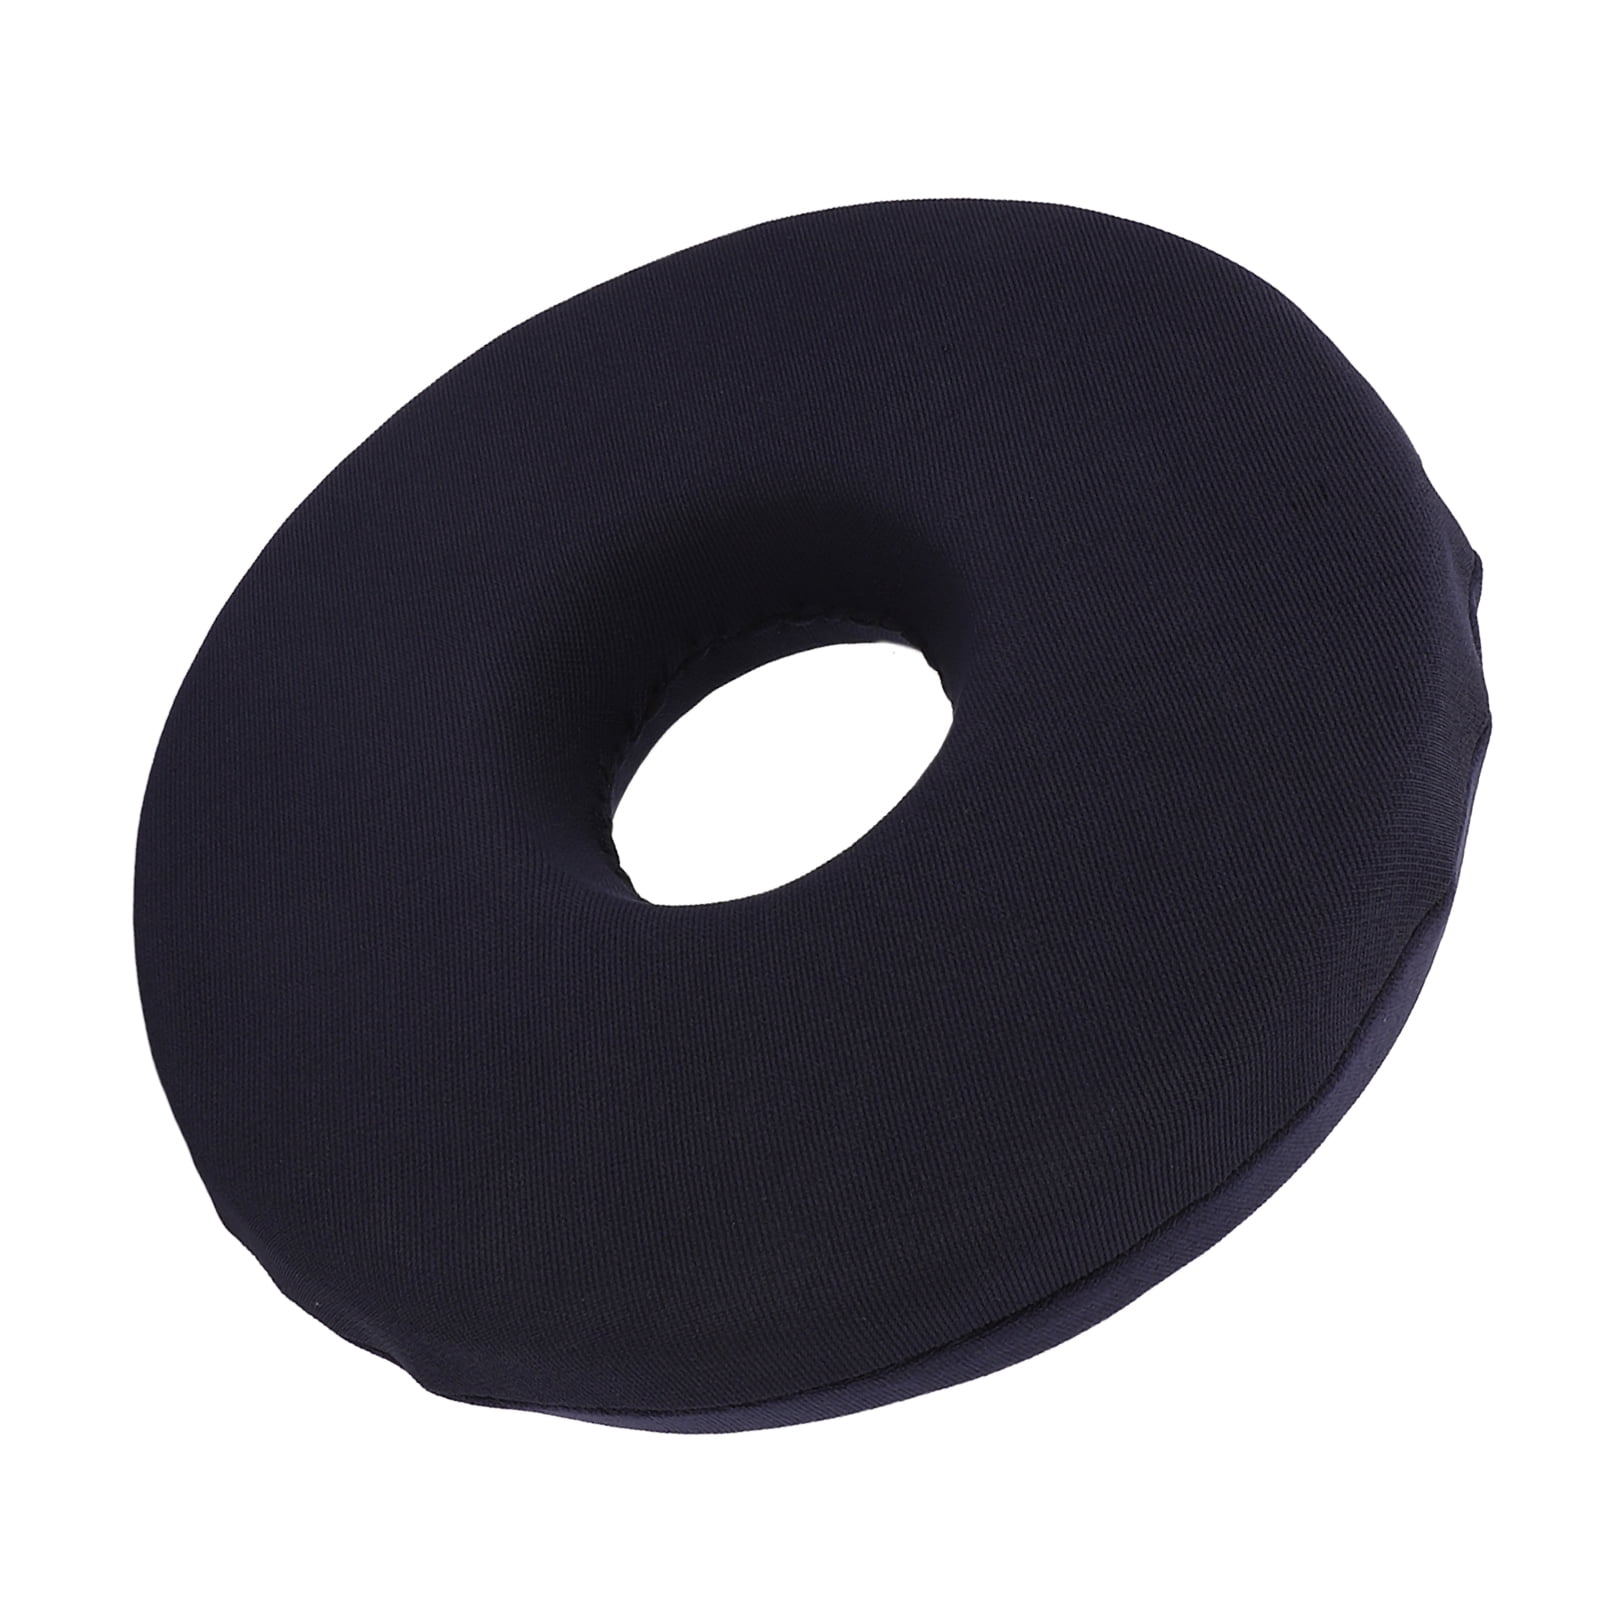 Bed Sore Donut Pillow Bed Sore Donut Cushion Pressure Ulcer Donut Cushion US